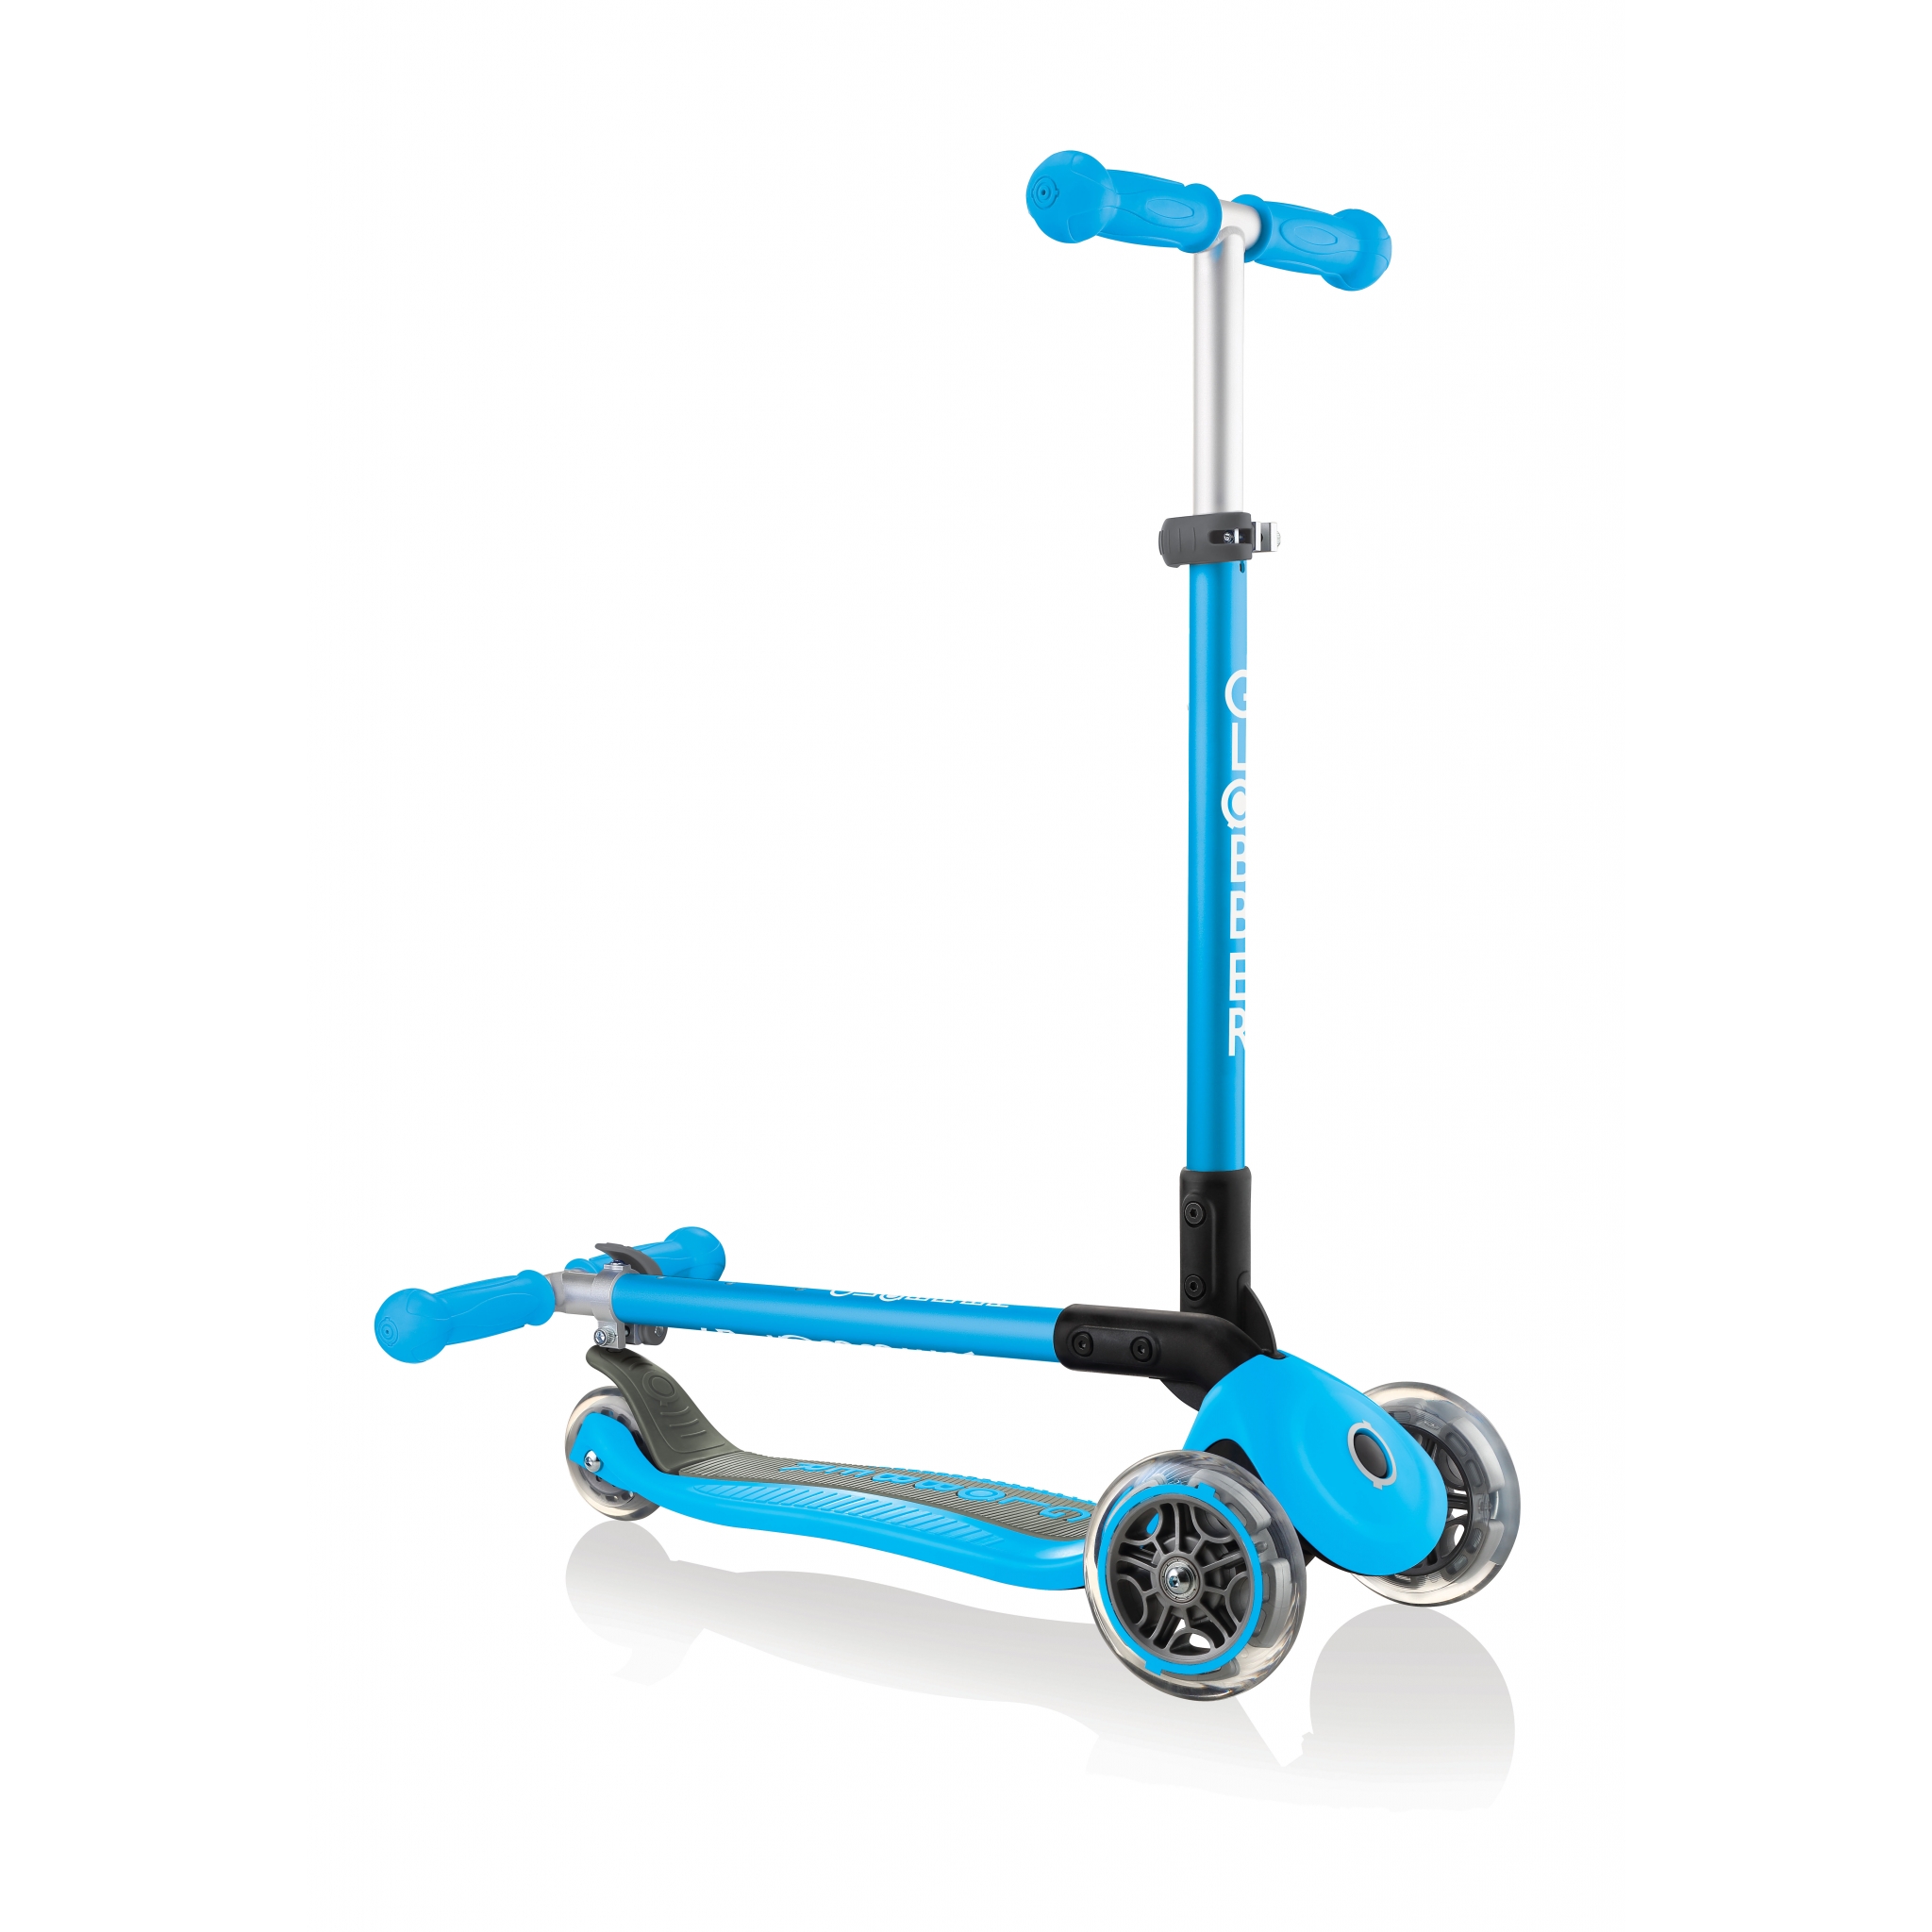 PRIMO-FOLDABLE-3-wheel-fold-up-scooter-for-kids-sky-blue 0